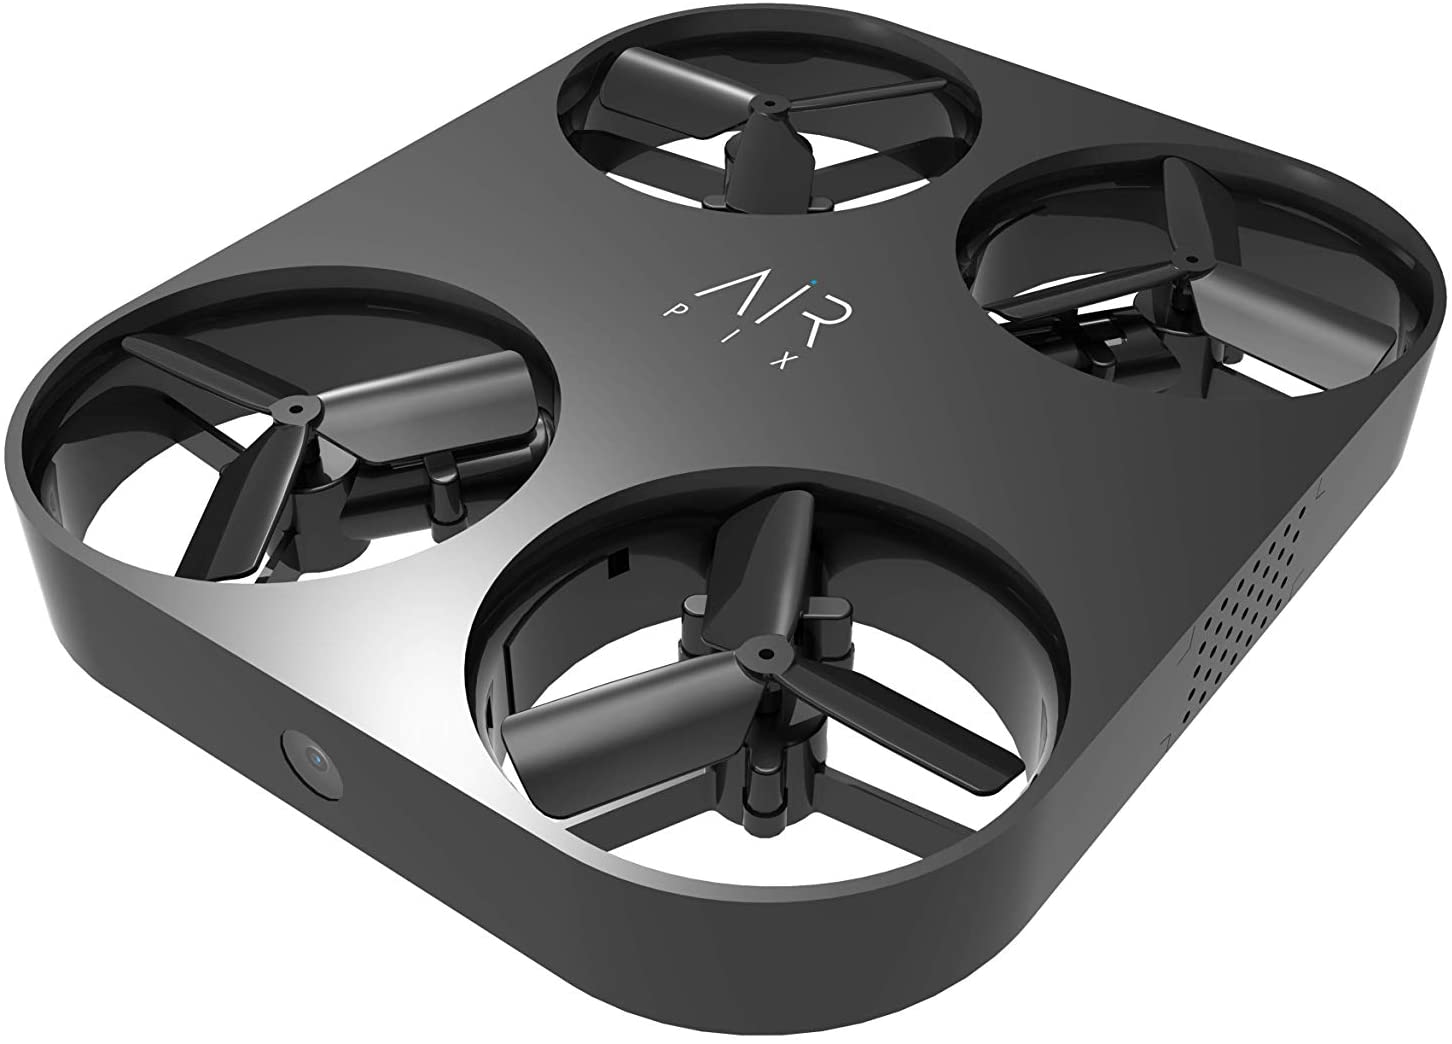 Image of AirPix drone